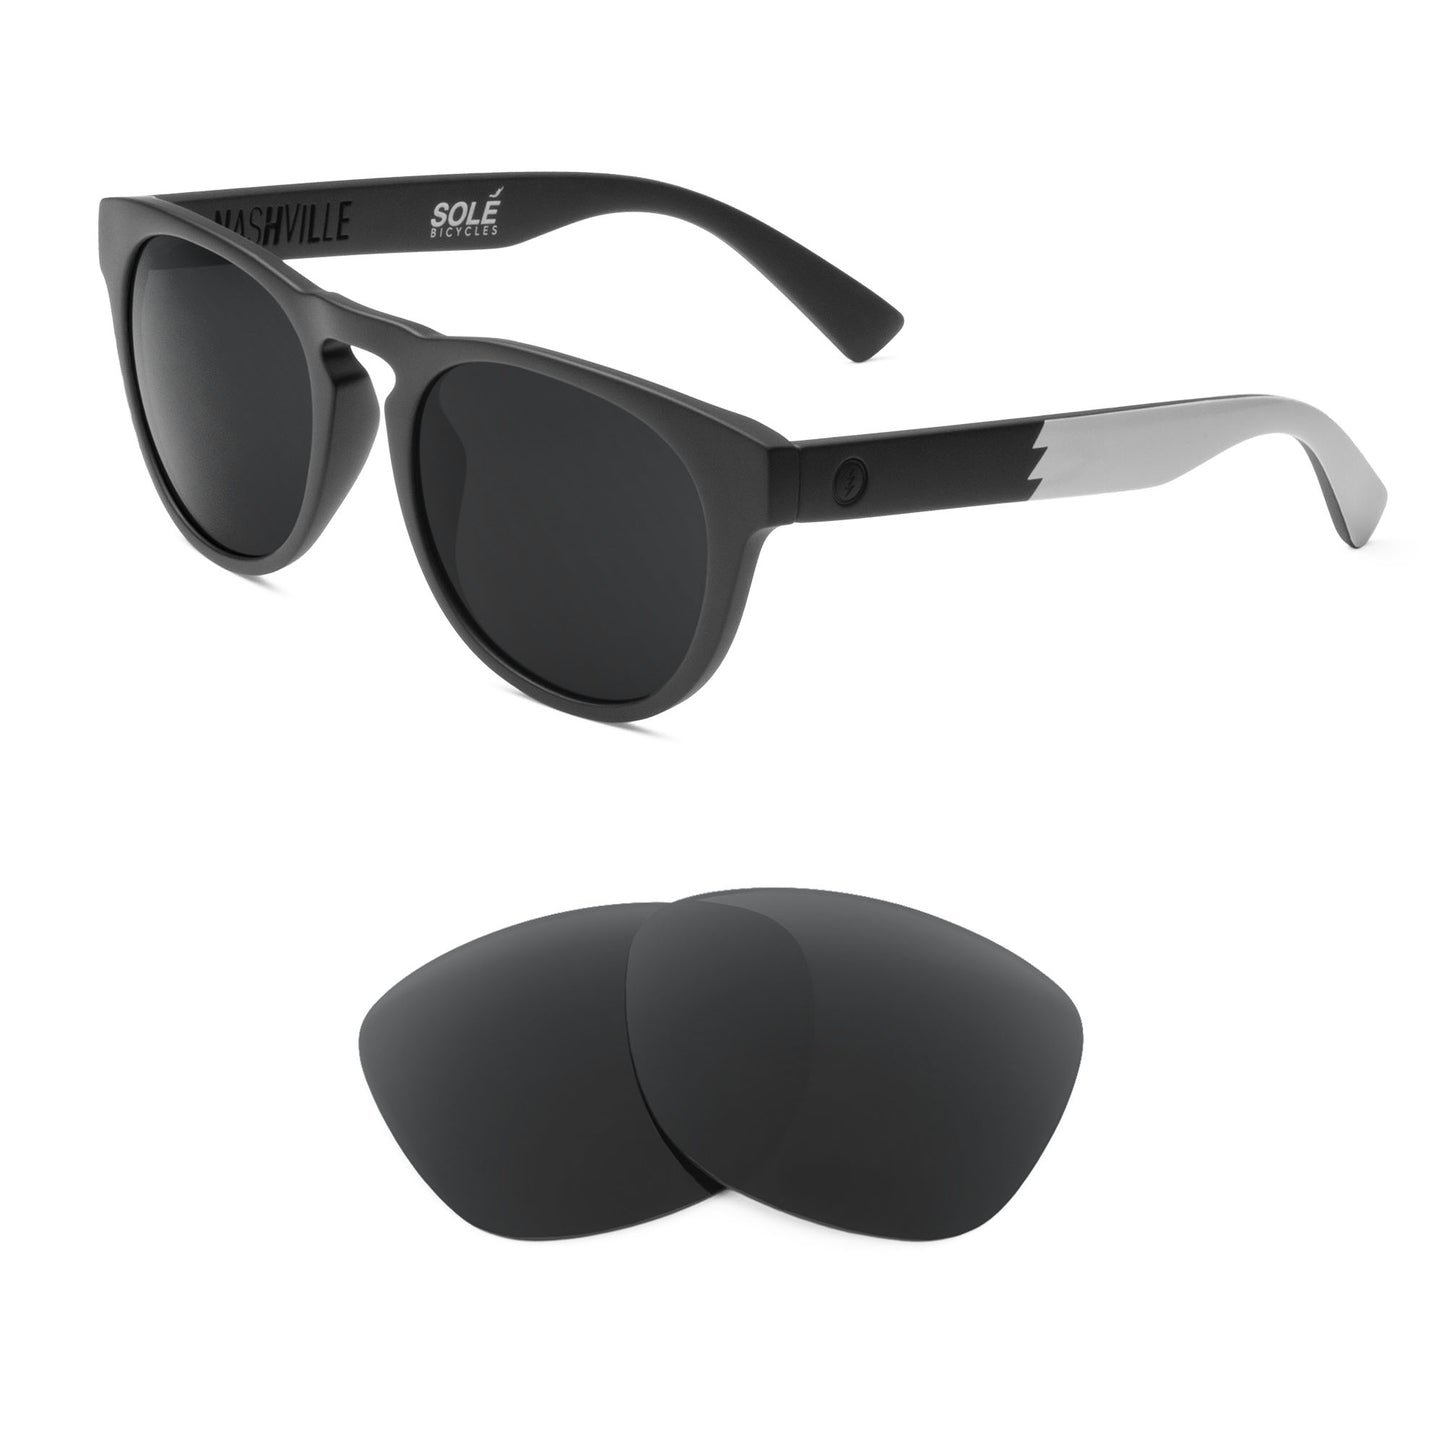 Electric Nashville sunglasses with replacement lenses